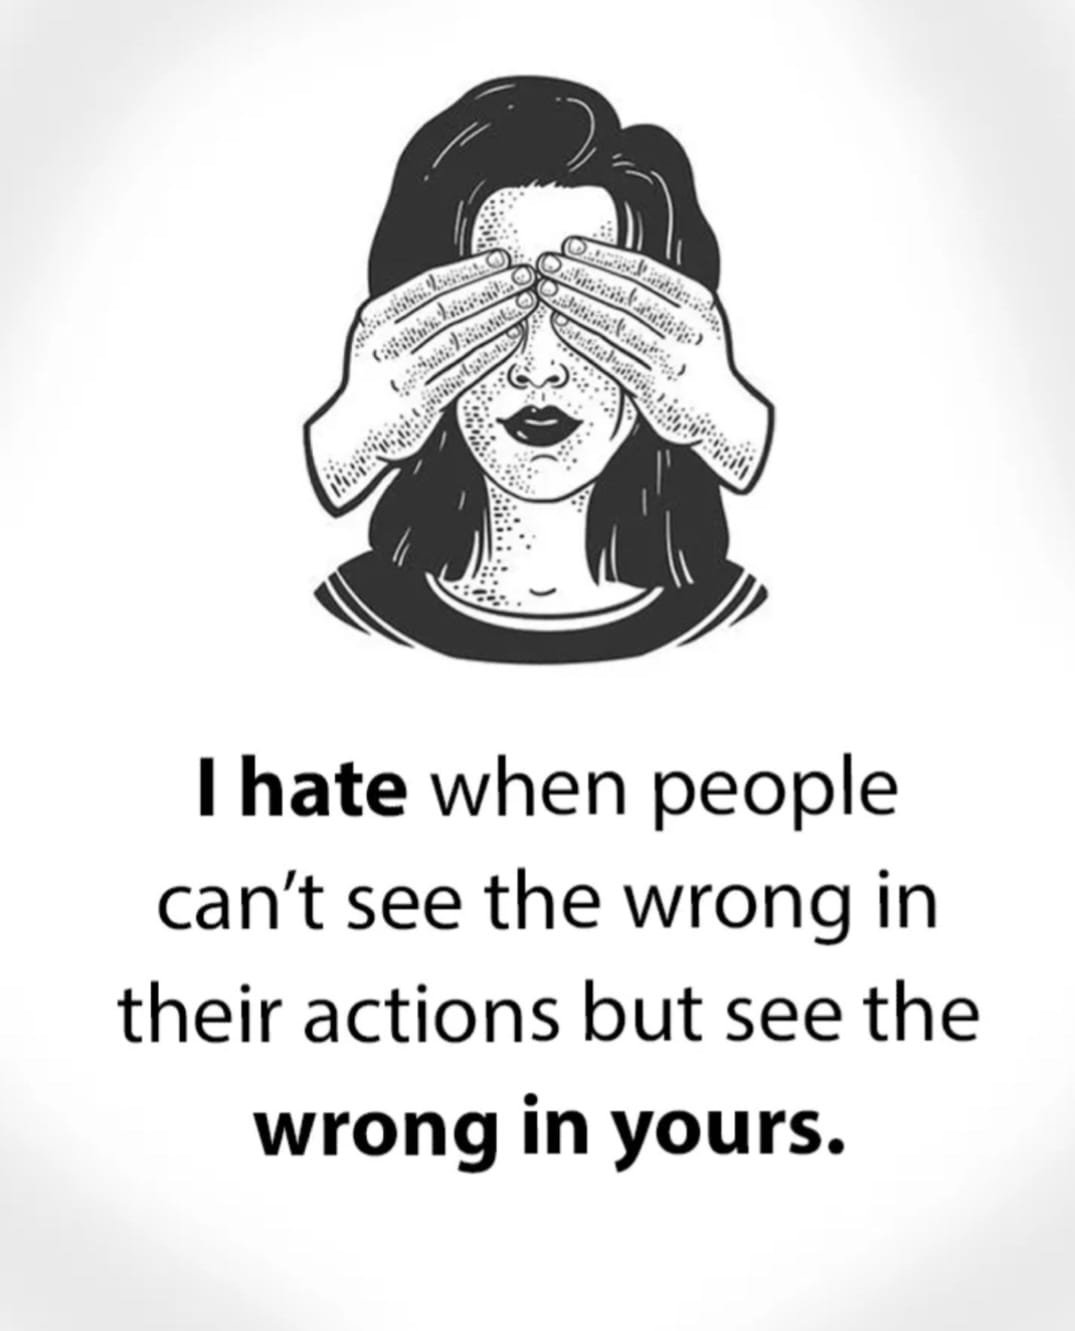 I hate when people can't see the wrong in their actions but see the wrong in yours